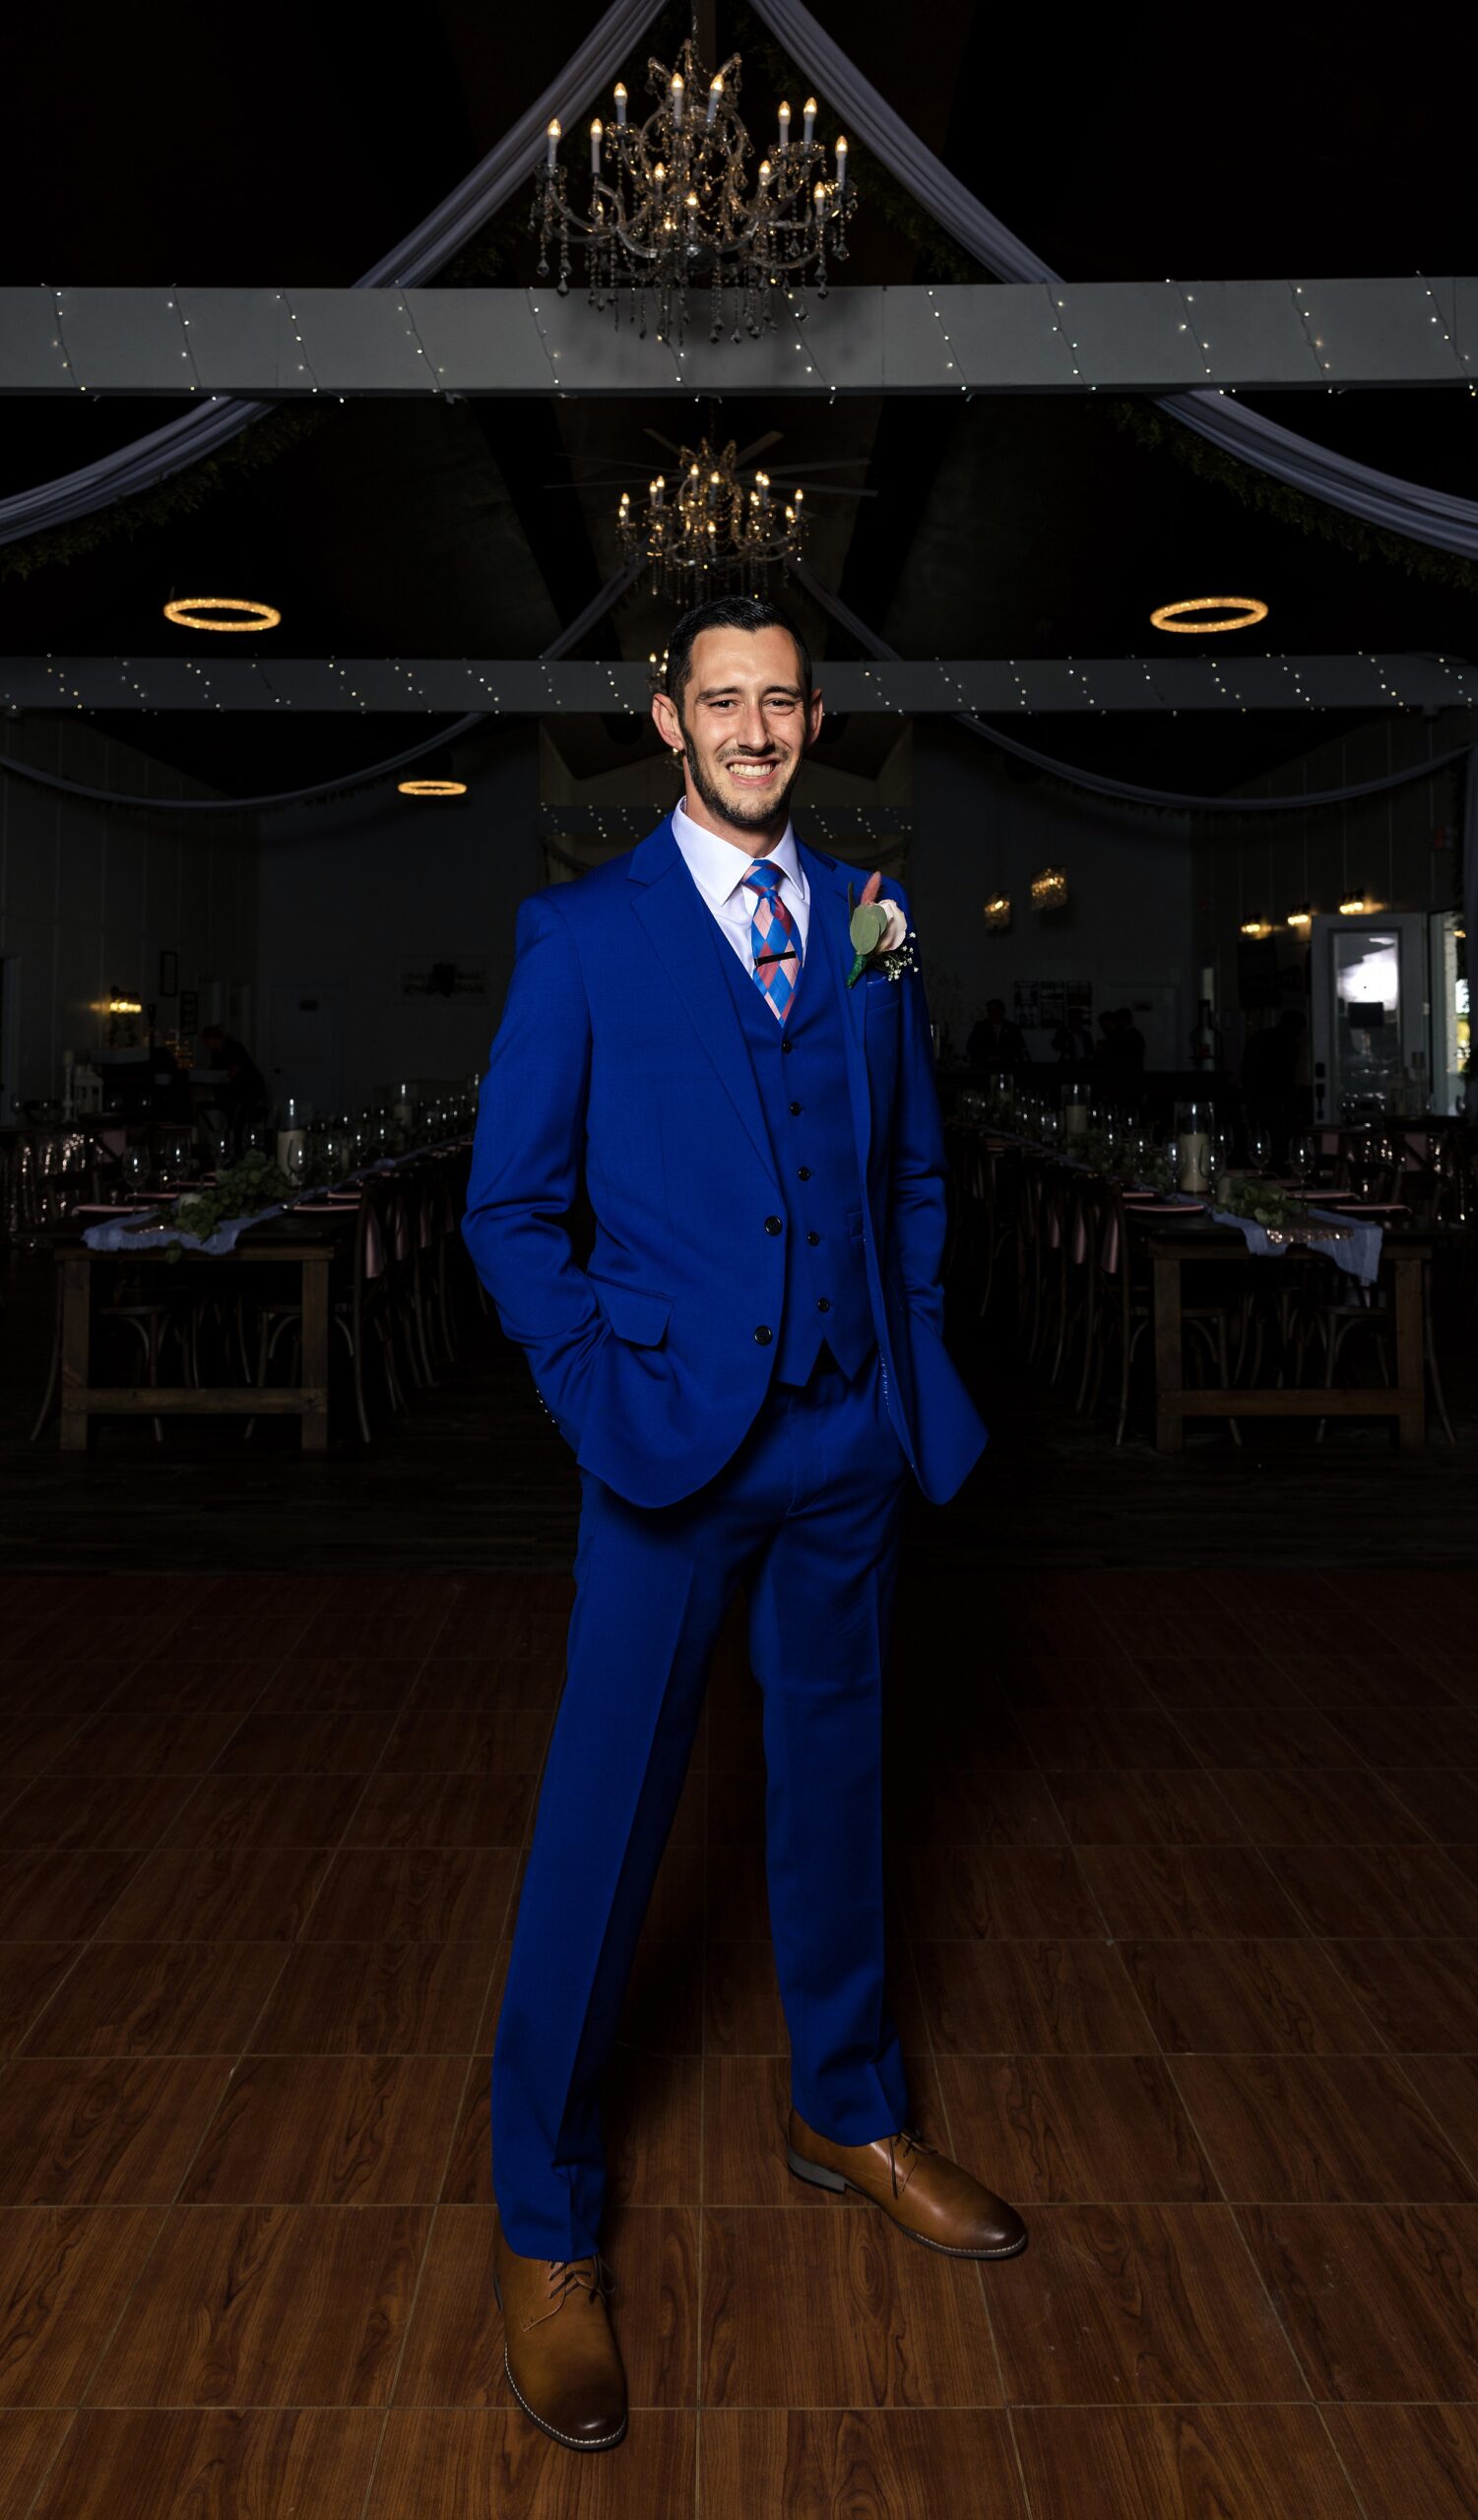 A groom in a blue suit standing under chandeliers with hands in pockets